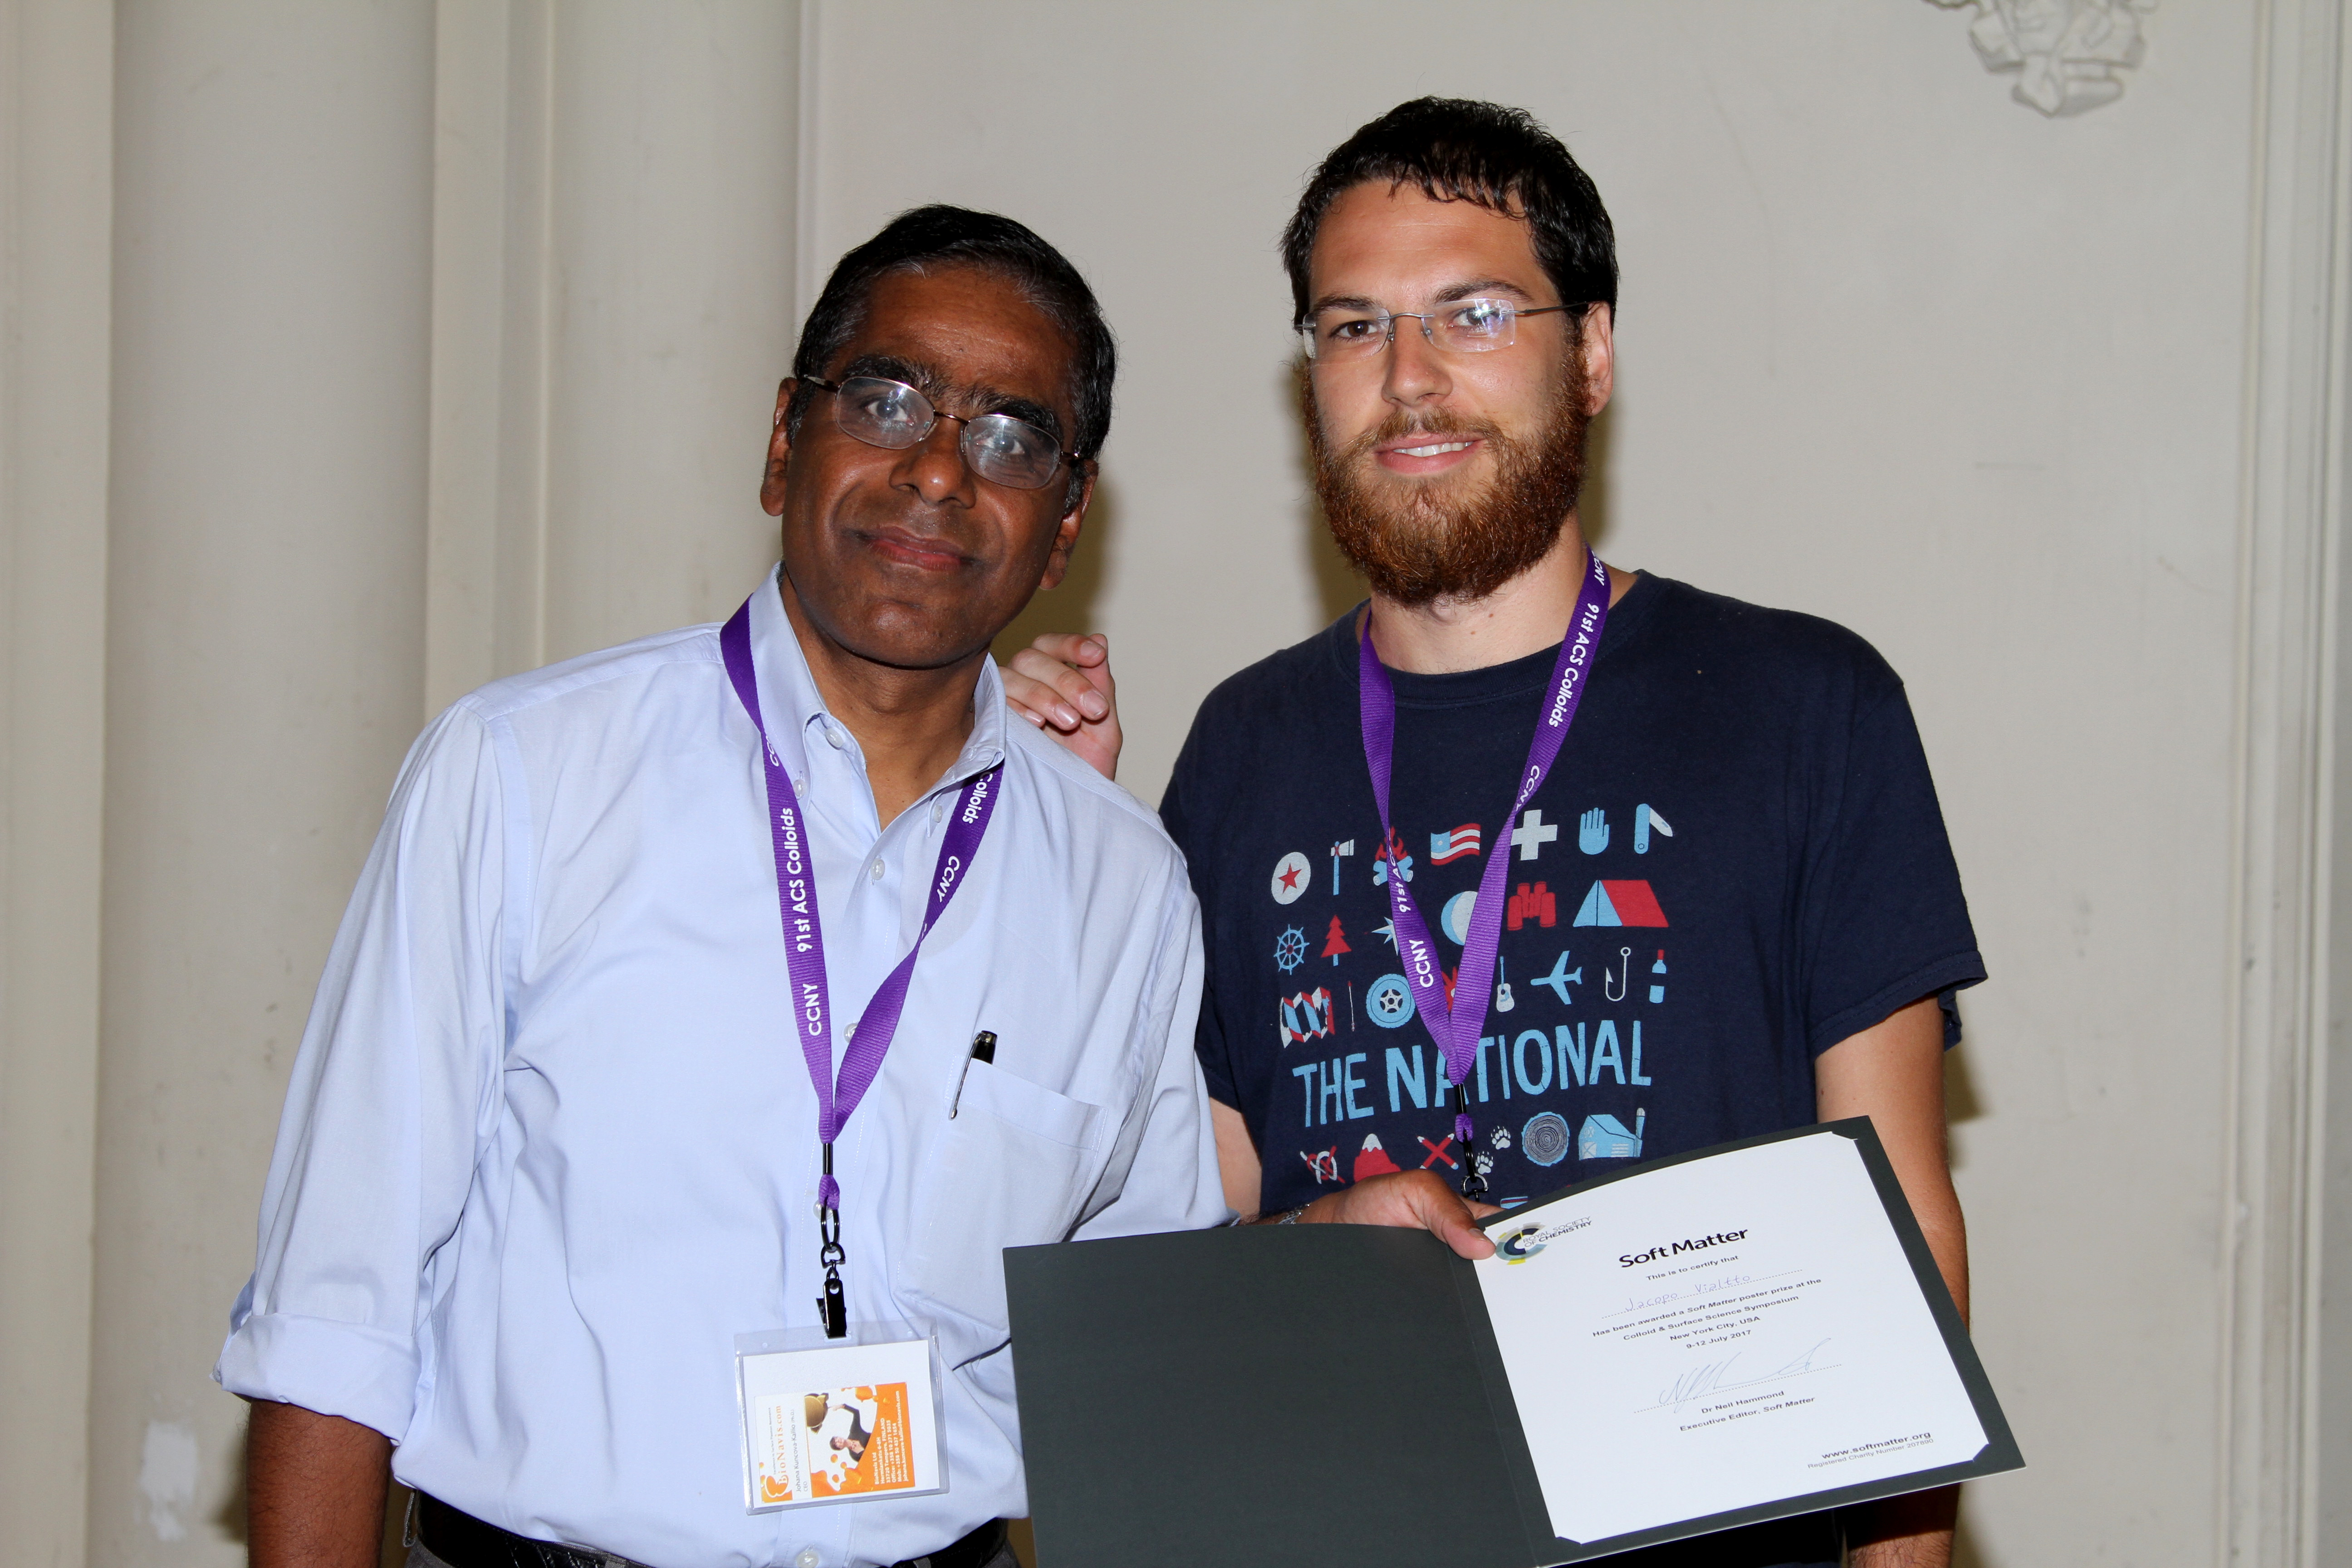 Soft Matter poster prize at the ACS Colloid & Surface Science Symposium